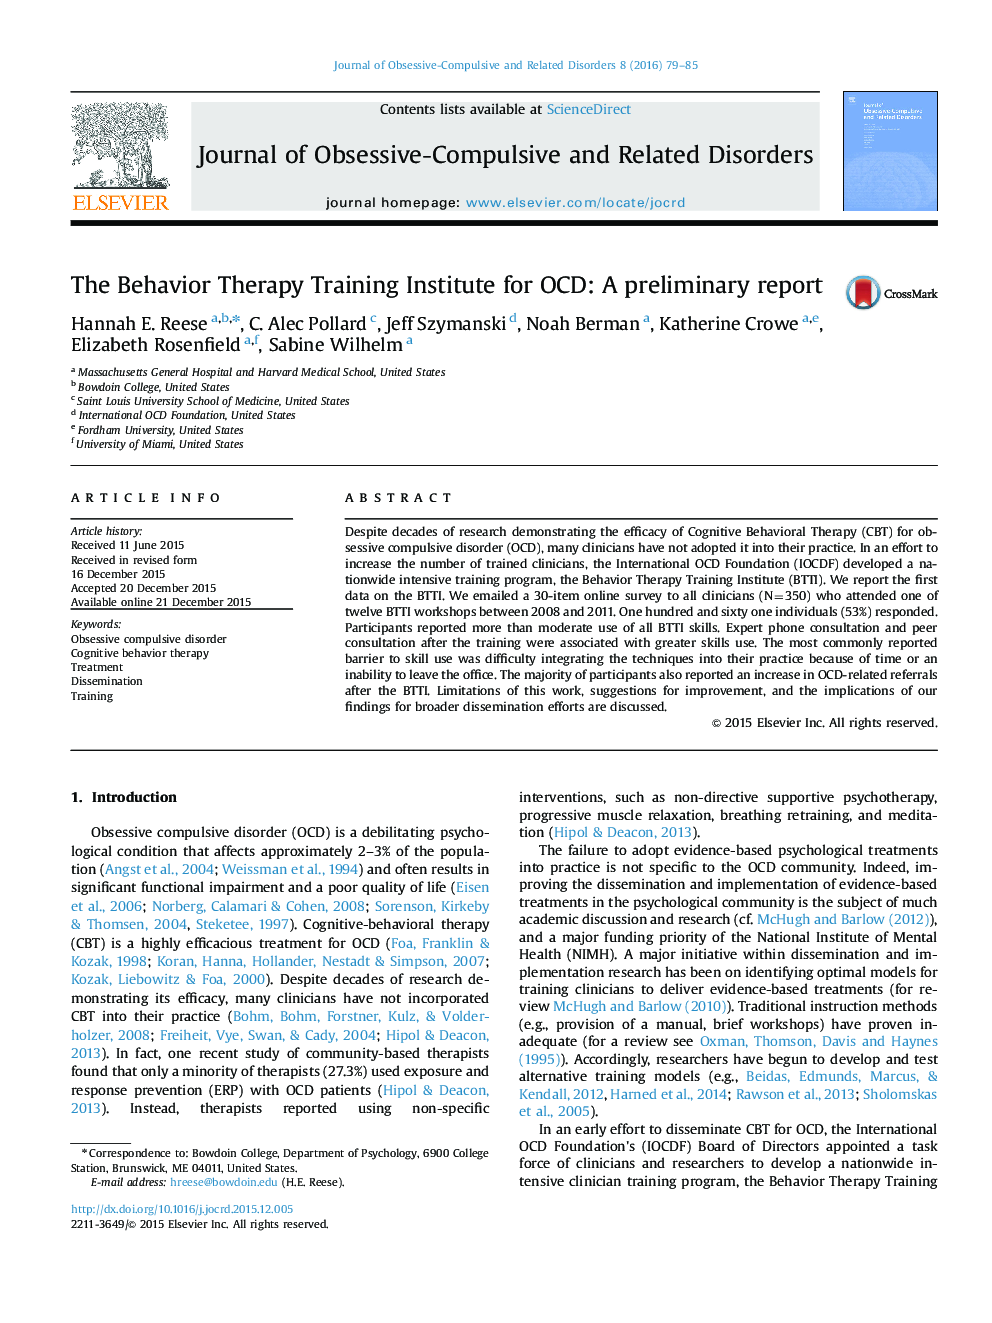 The Behavior Therapy Training Institute for OCD: A preliminary report